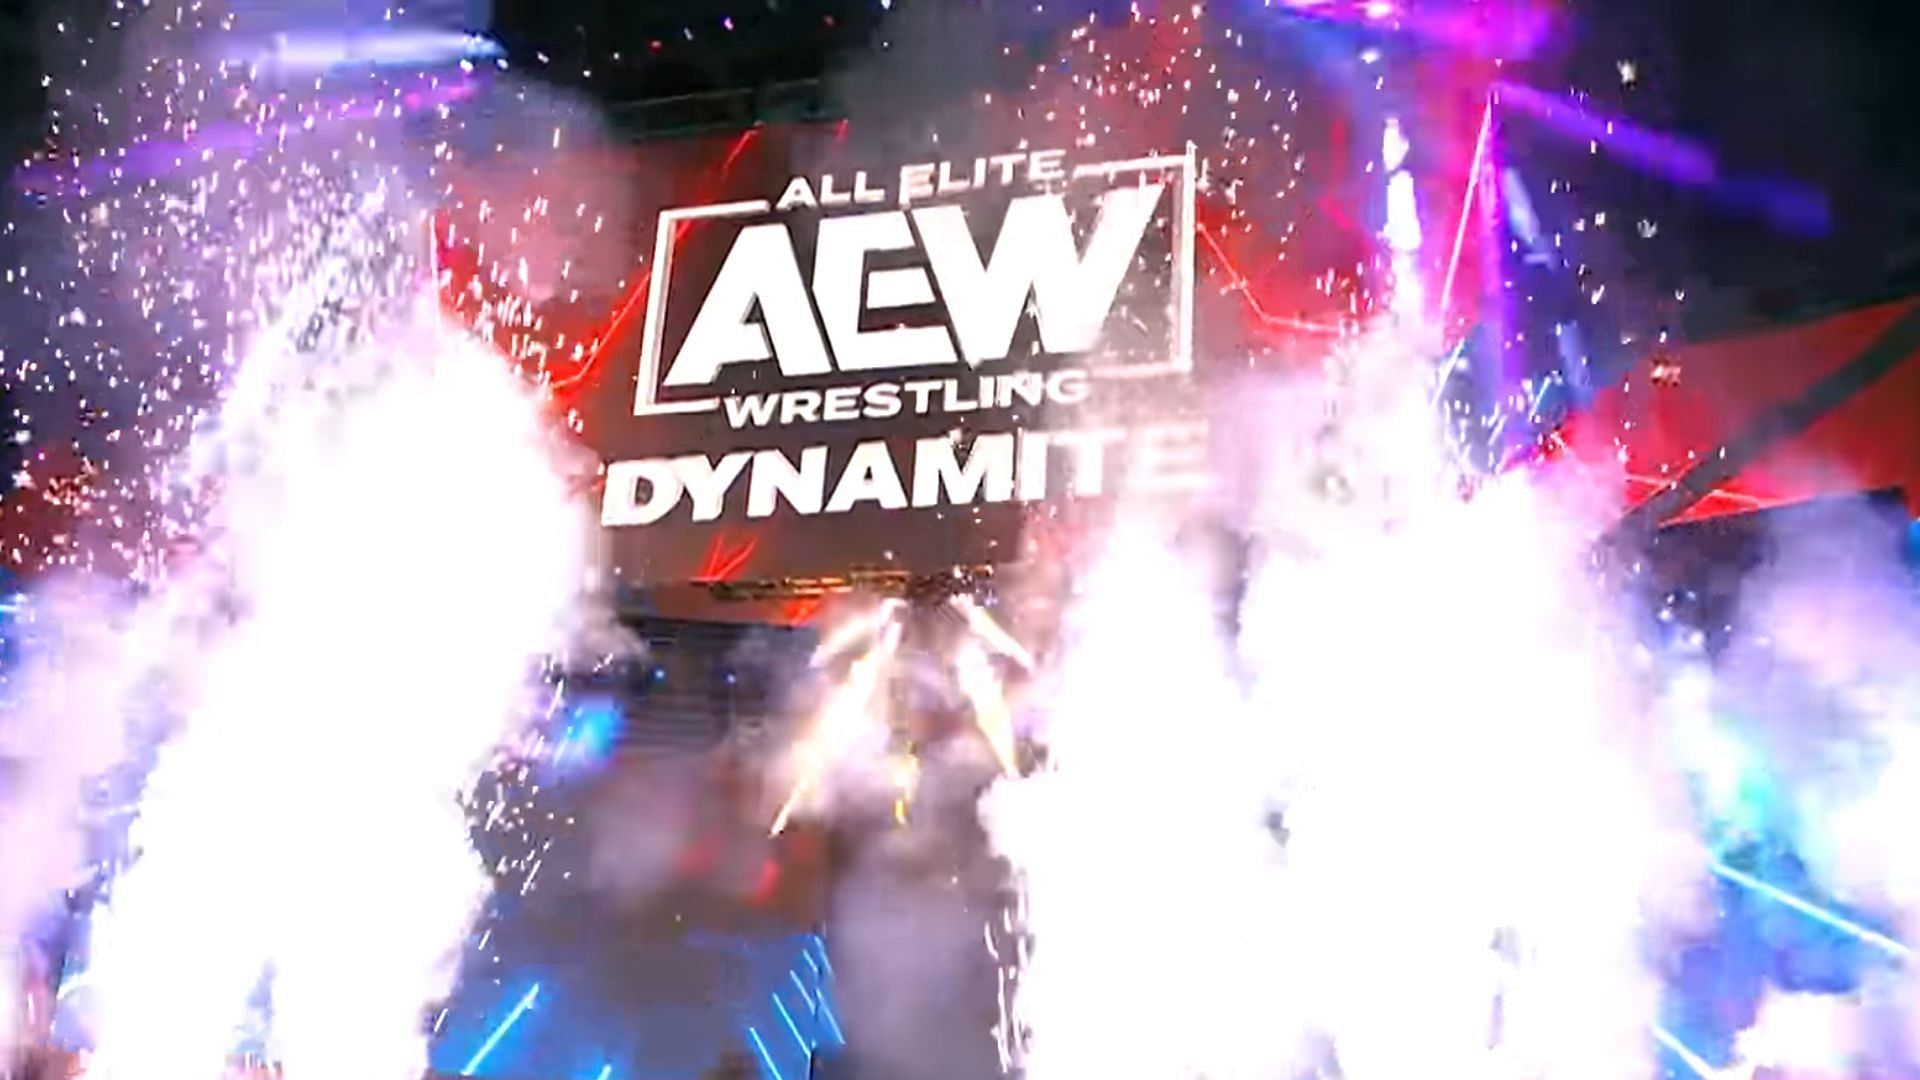 AEW was created in 2019 by Tony Khan